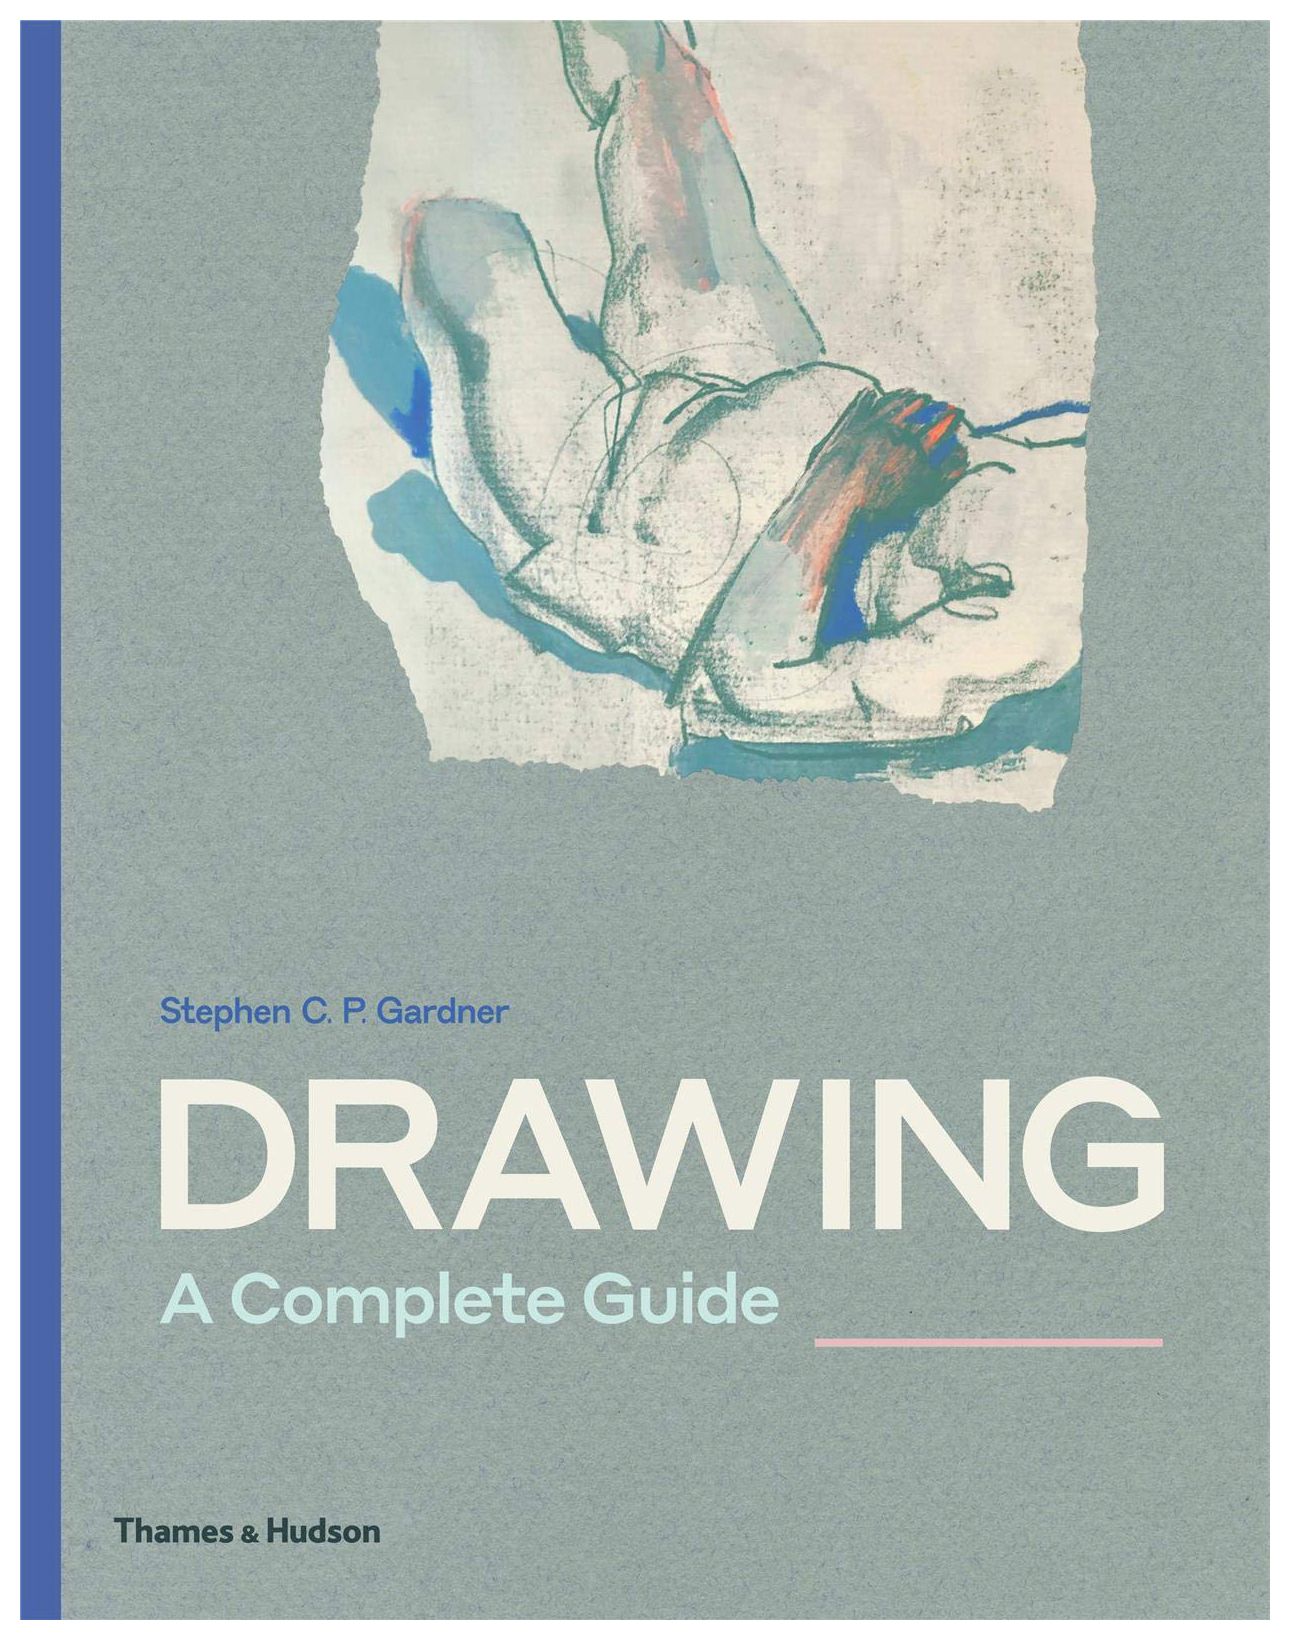 exploring the elements a complete guide to the periodic table Drawing: A Complete Guide